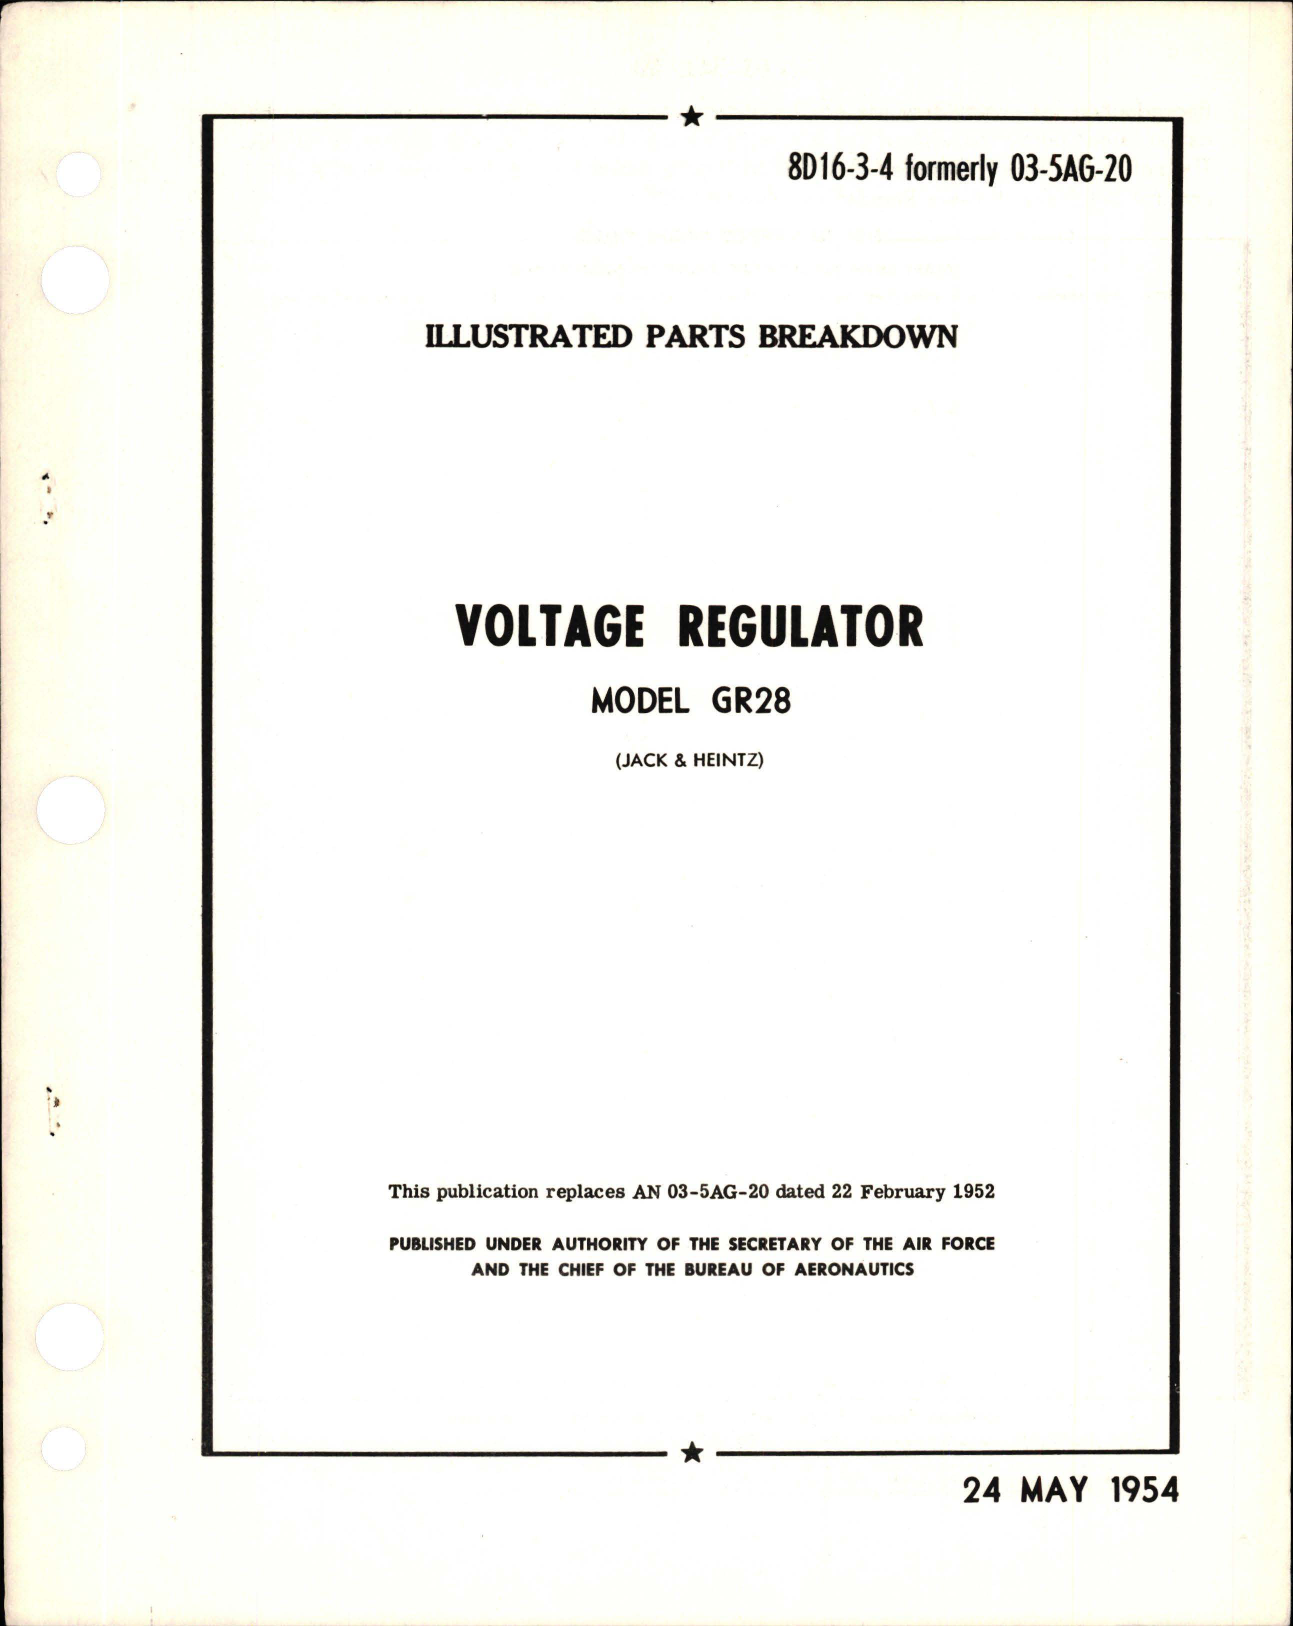 Sample page 1 from AirCorps Library document: Illustrated Parts Breakdown for Voltage Regulator - Model GR28